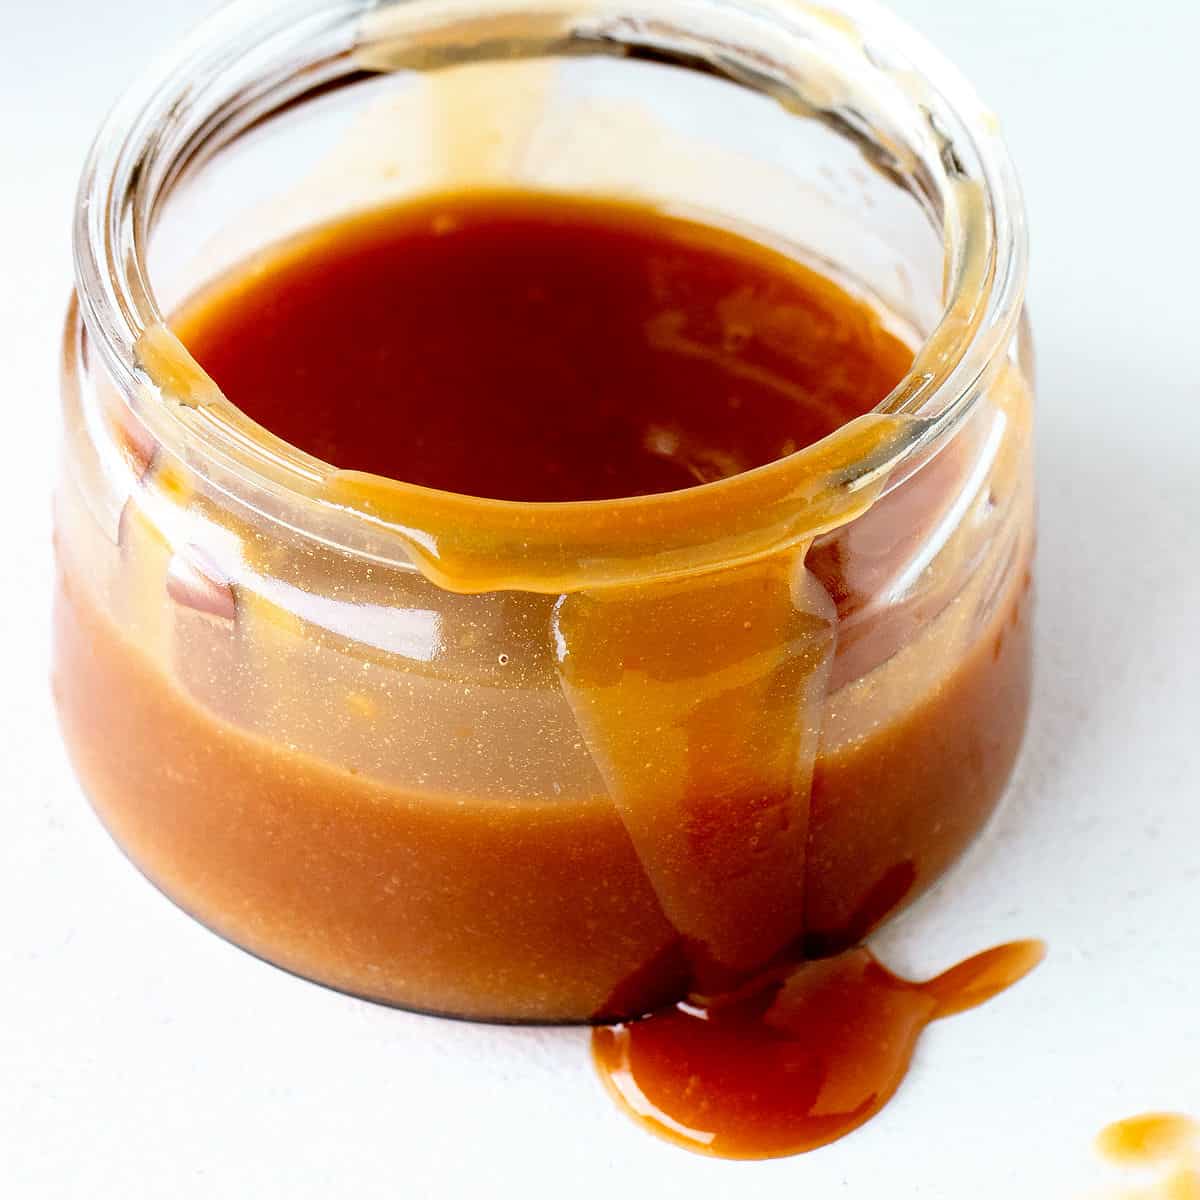 Close up of jar with dulce de leche on a white surface.